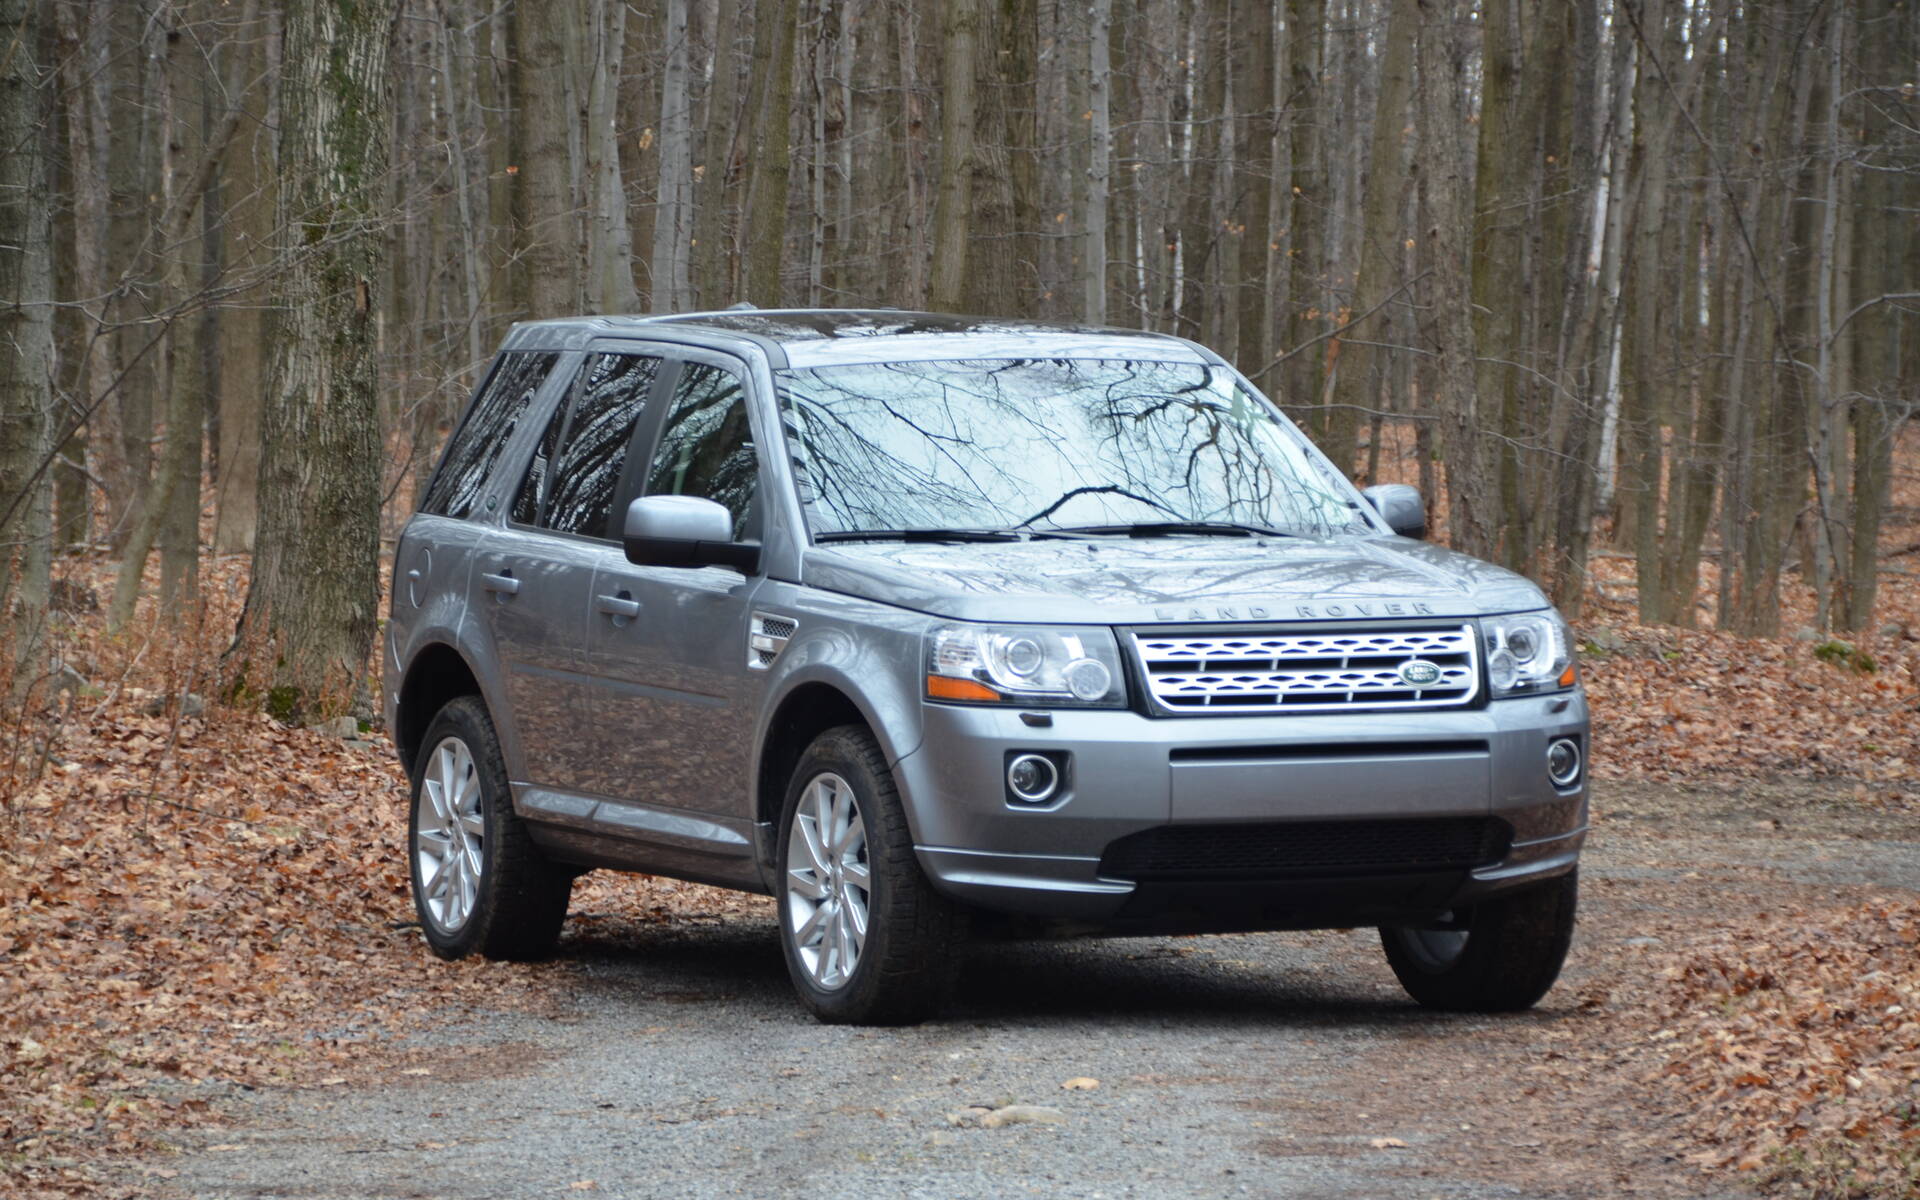 Land Rover LR2, LR3 or LR4: What's the Difference?